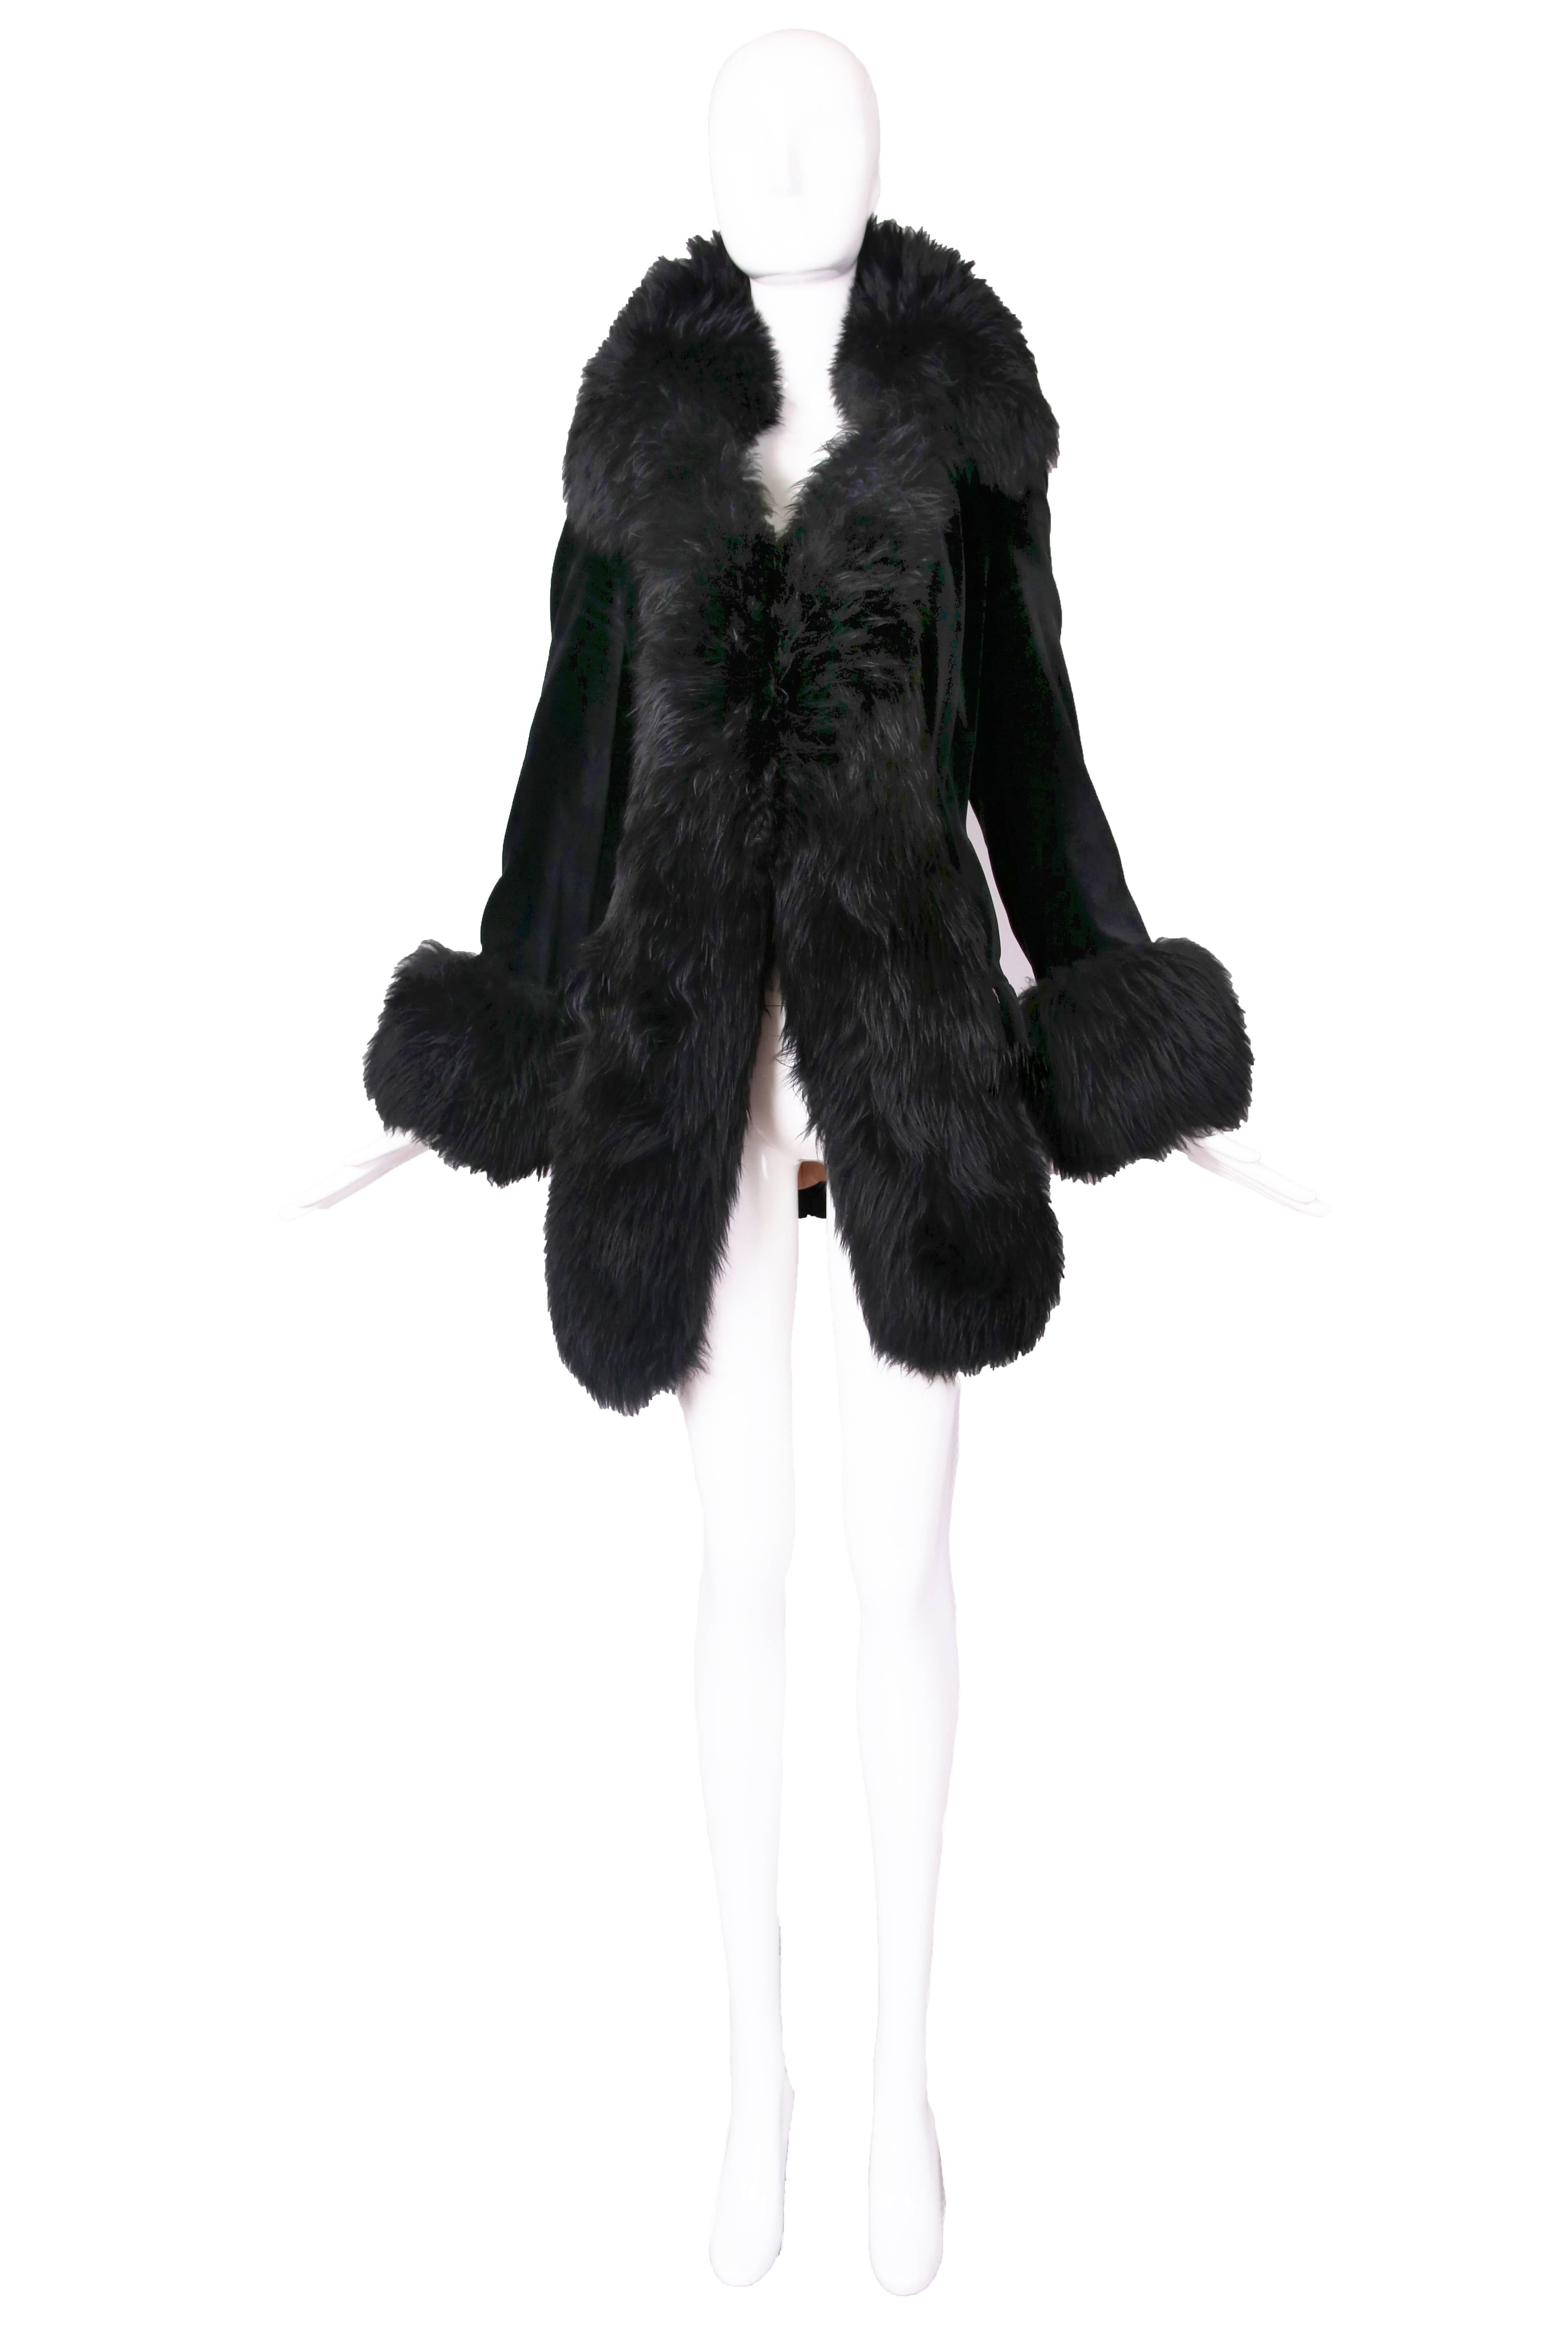 1990's Vivienne Westwood dramatic black velvet jacket with oversized faux fur trim at opening, collar, and cuffs. Size 40
MEASUREMENTS:
Shoulders - 16